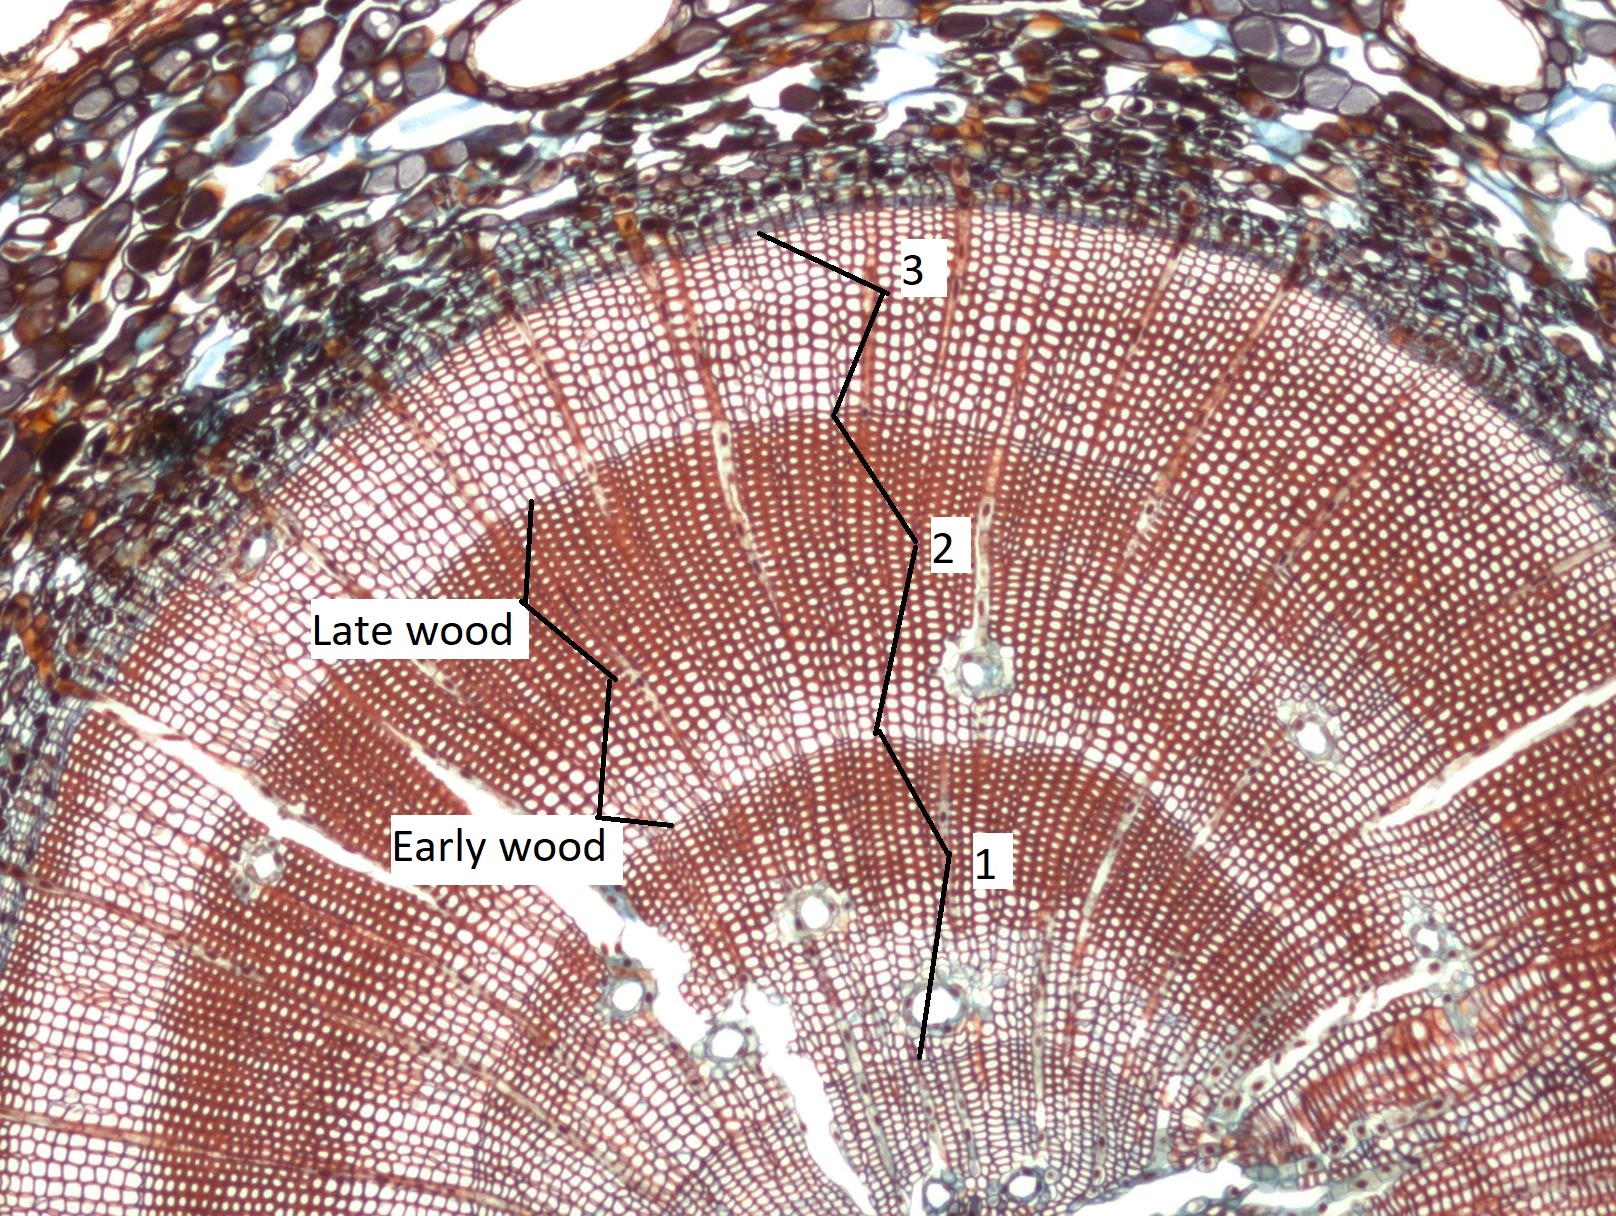 A close up on the annual growth rings in the pinus stem